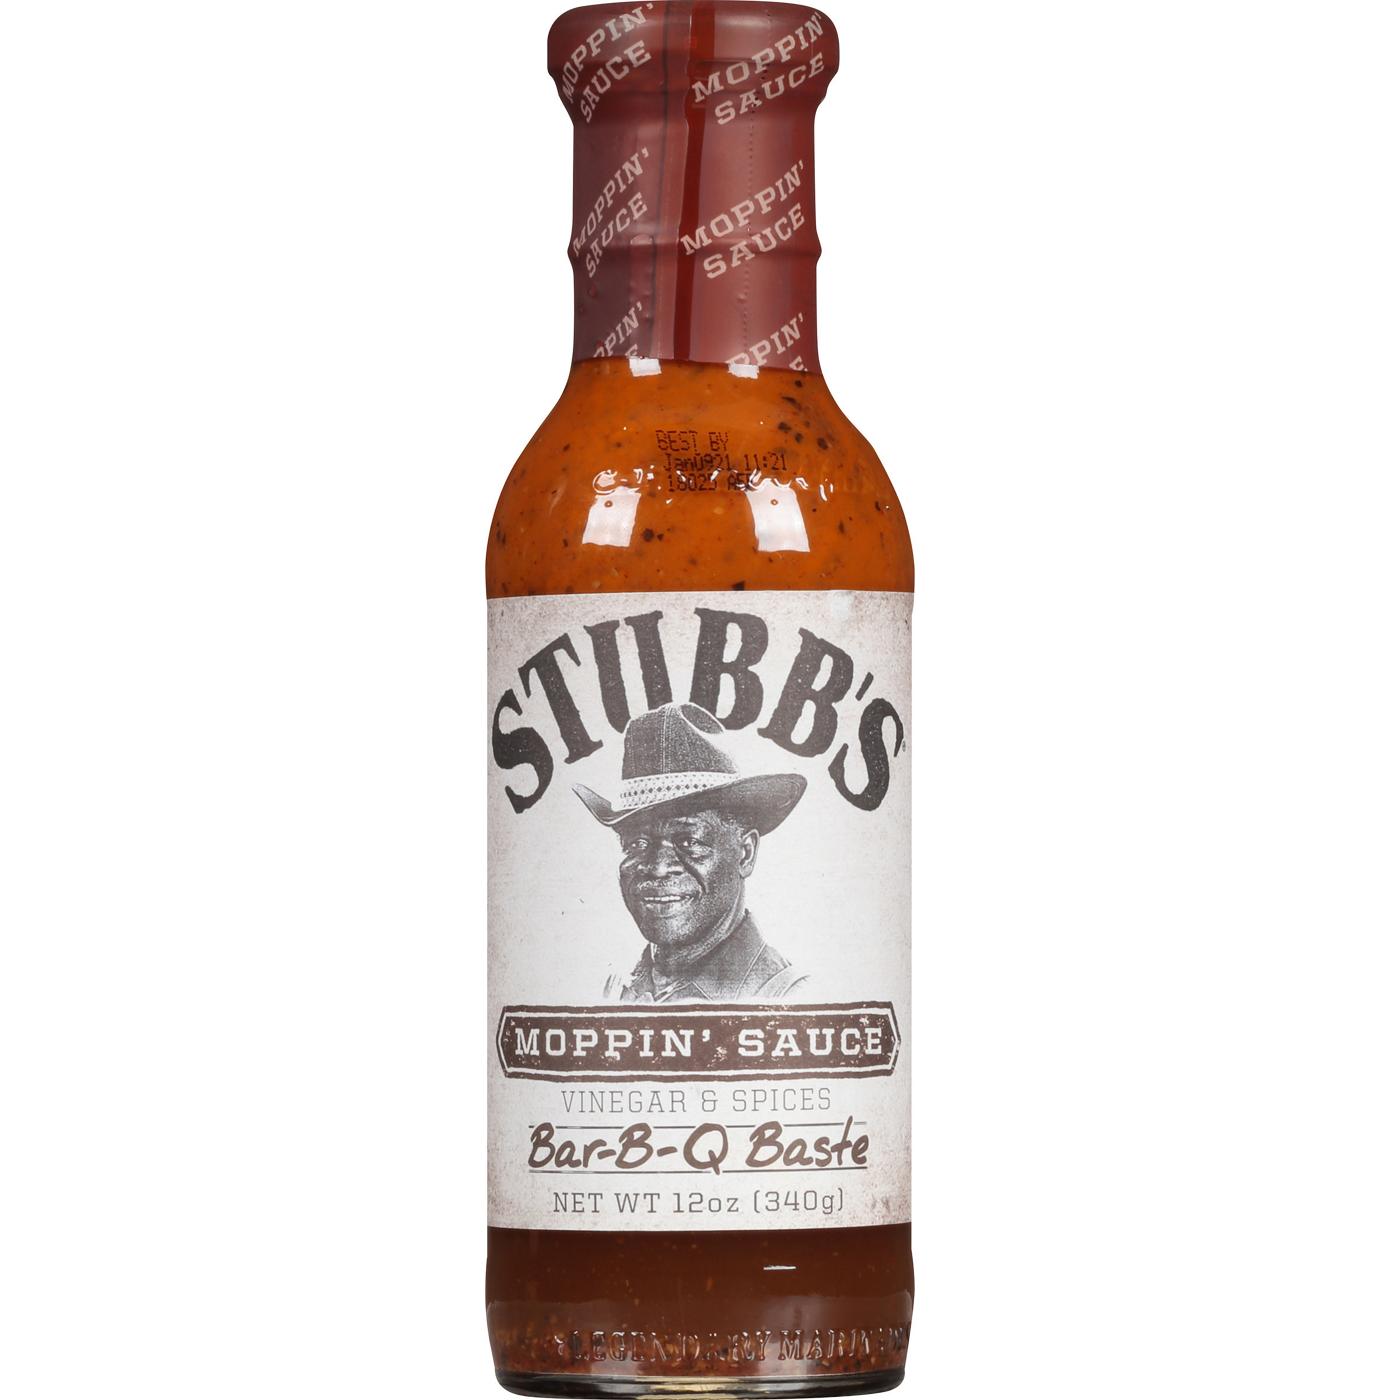 Stubb's Moppin' Sauce Barbecue Baste; image 1 of 9